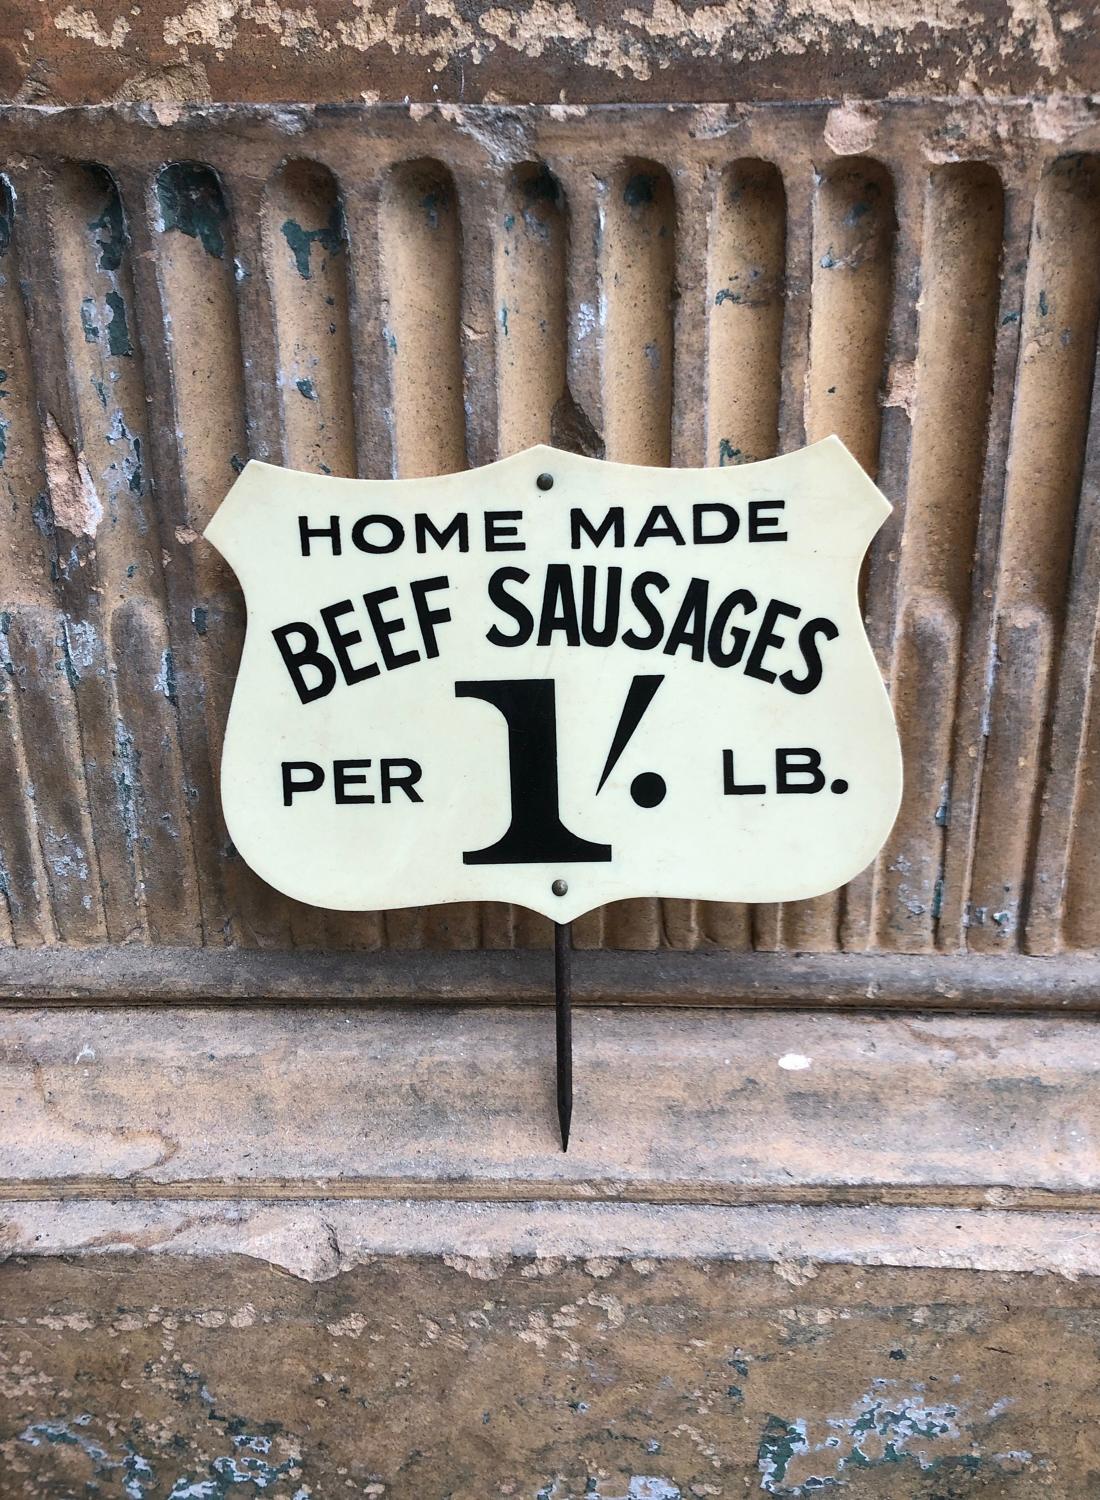 1940s Butchers Advertising Shop Sign - Home Made Beef Sausages